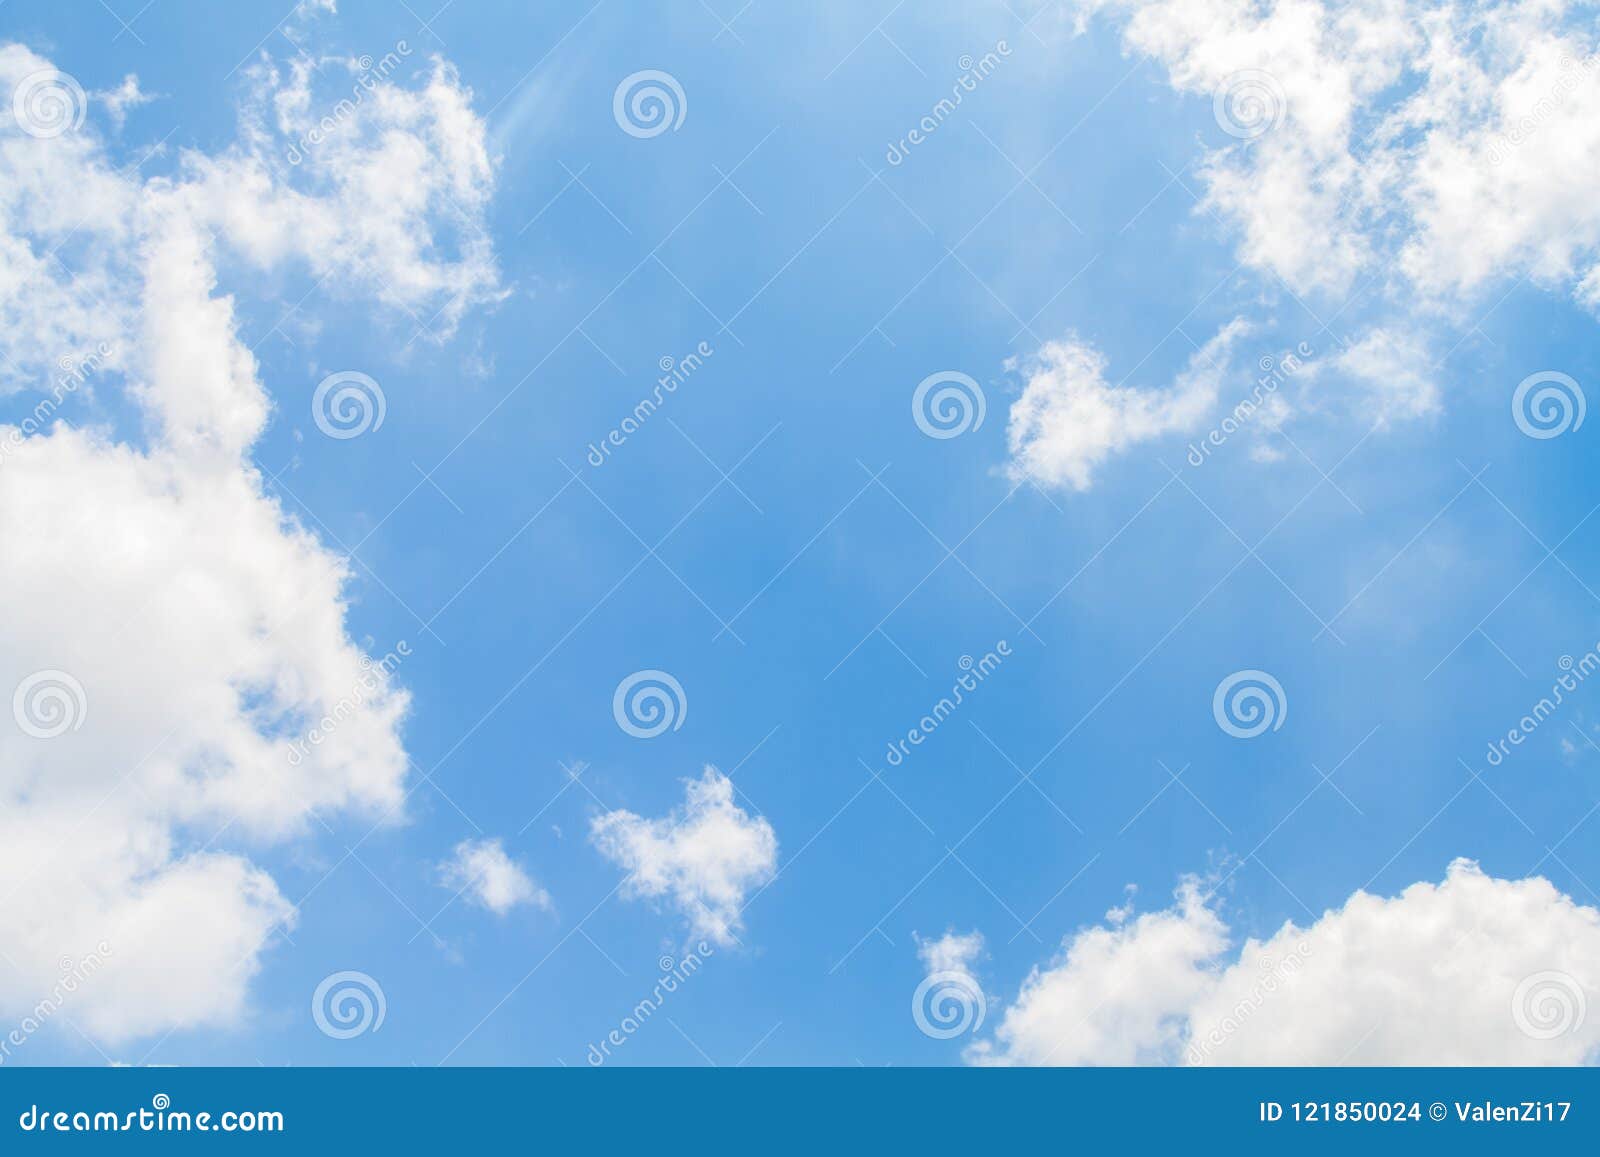 White clouds on a blue sky stock photo. Image of view - 121850024